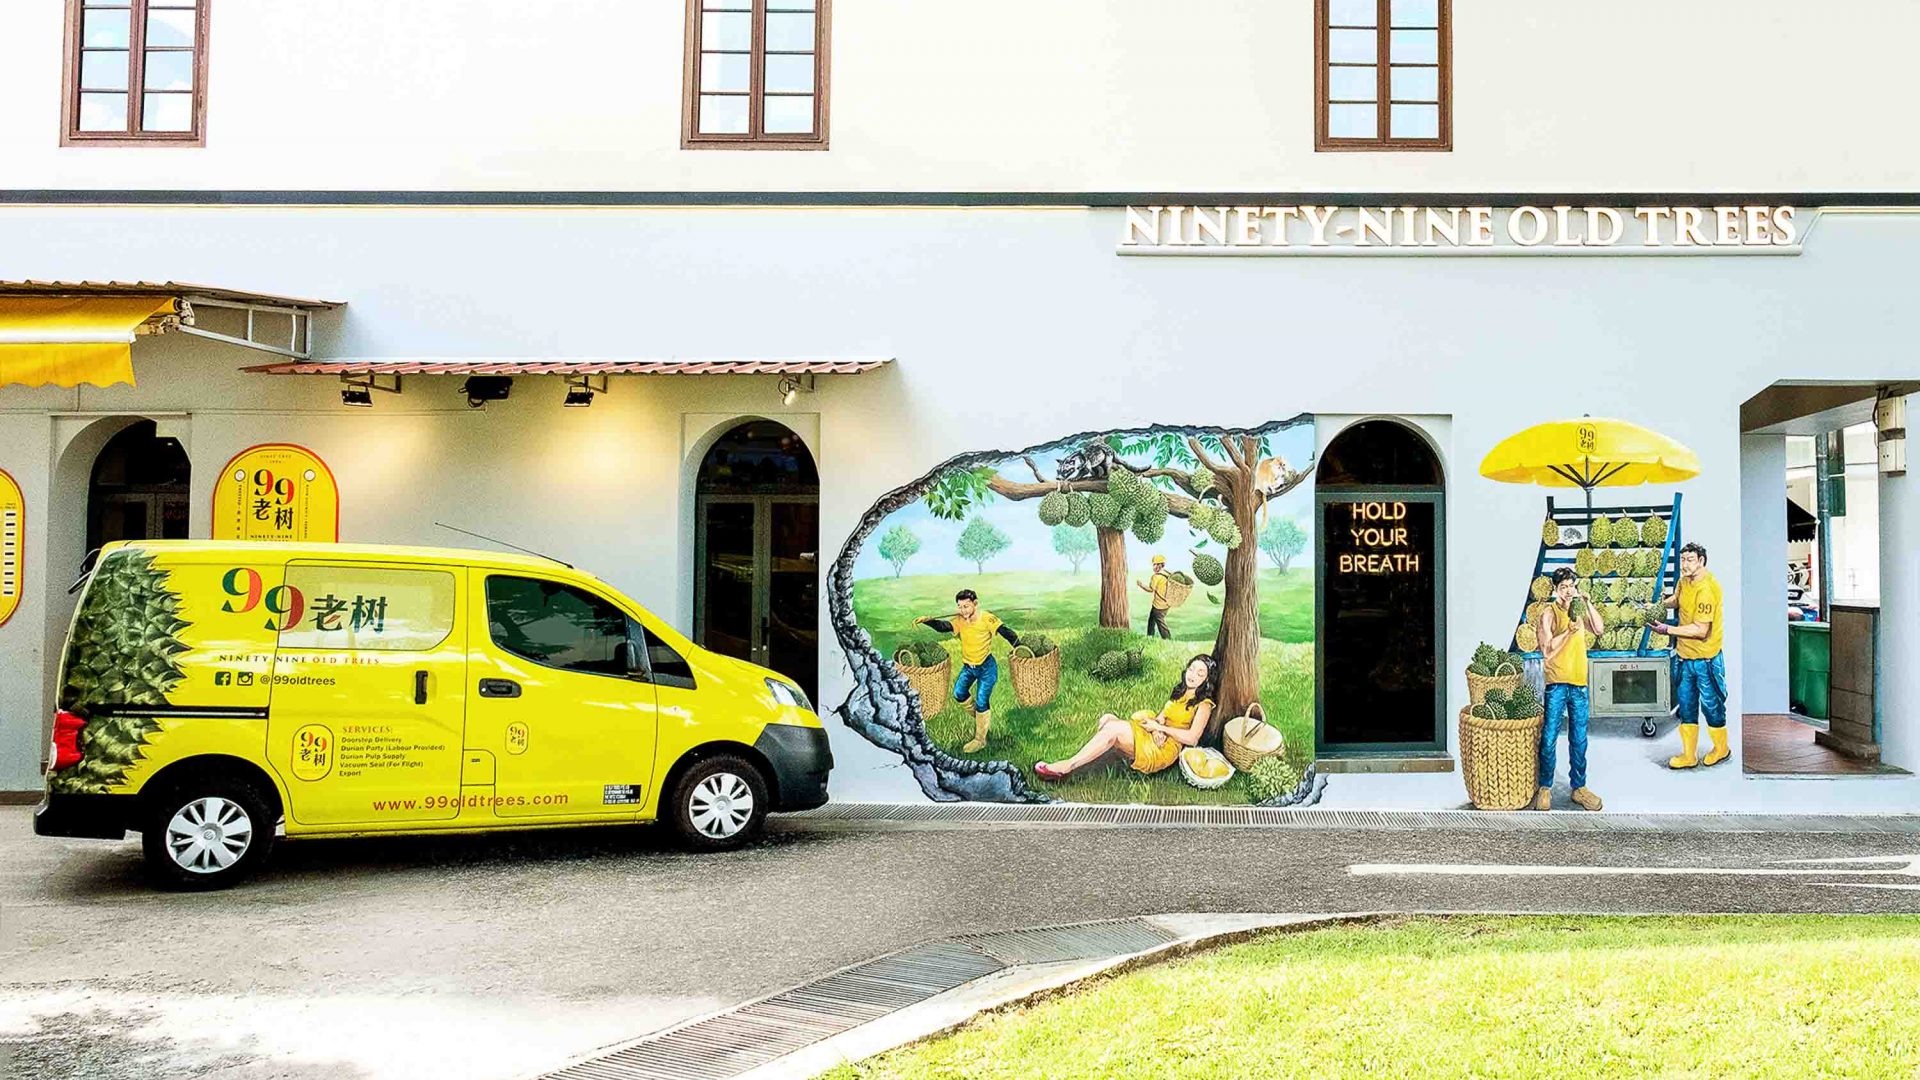 The mural covered exterior of Ninety nine Old Trees cafe.